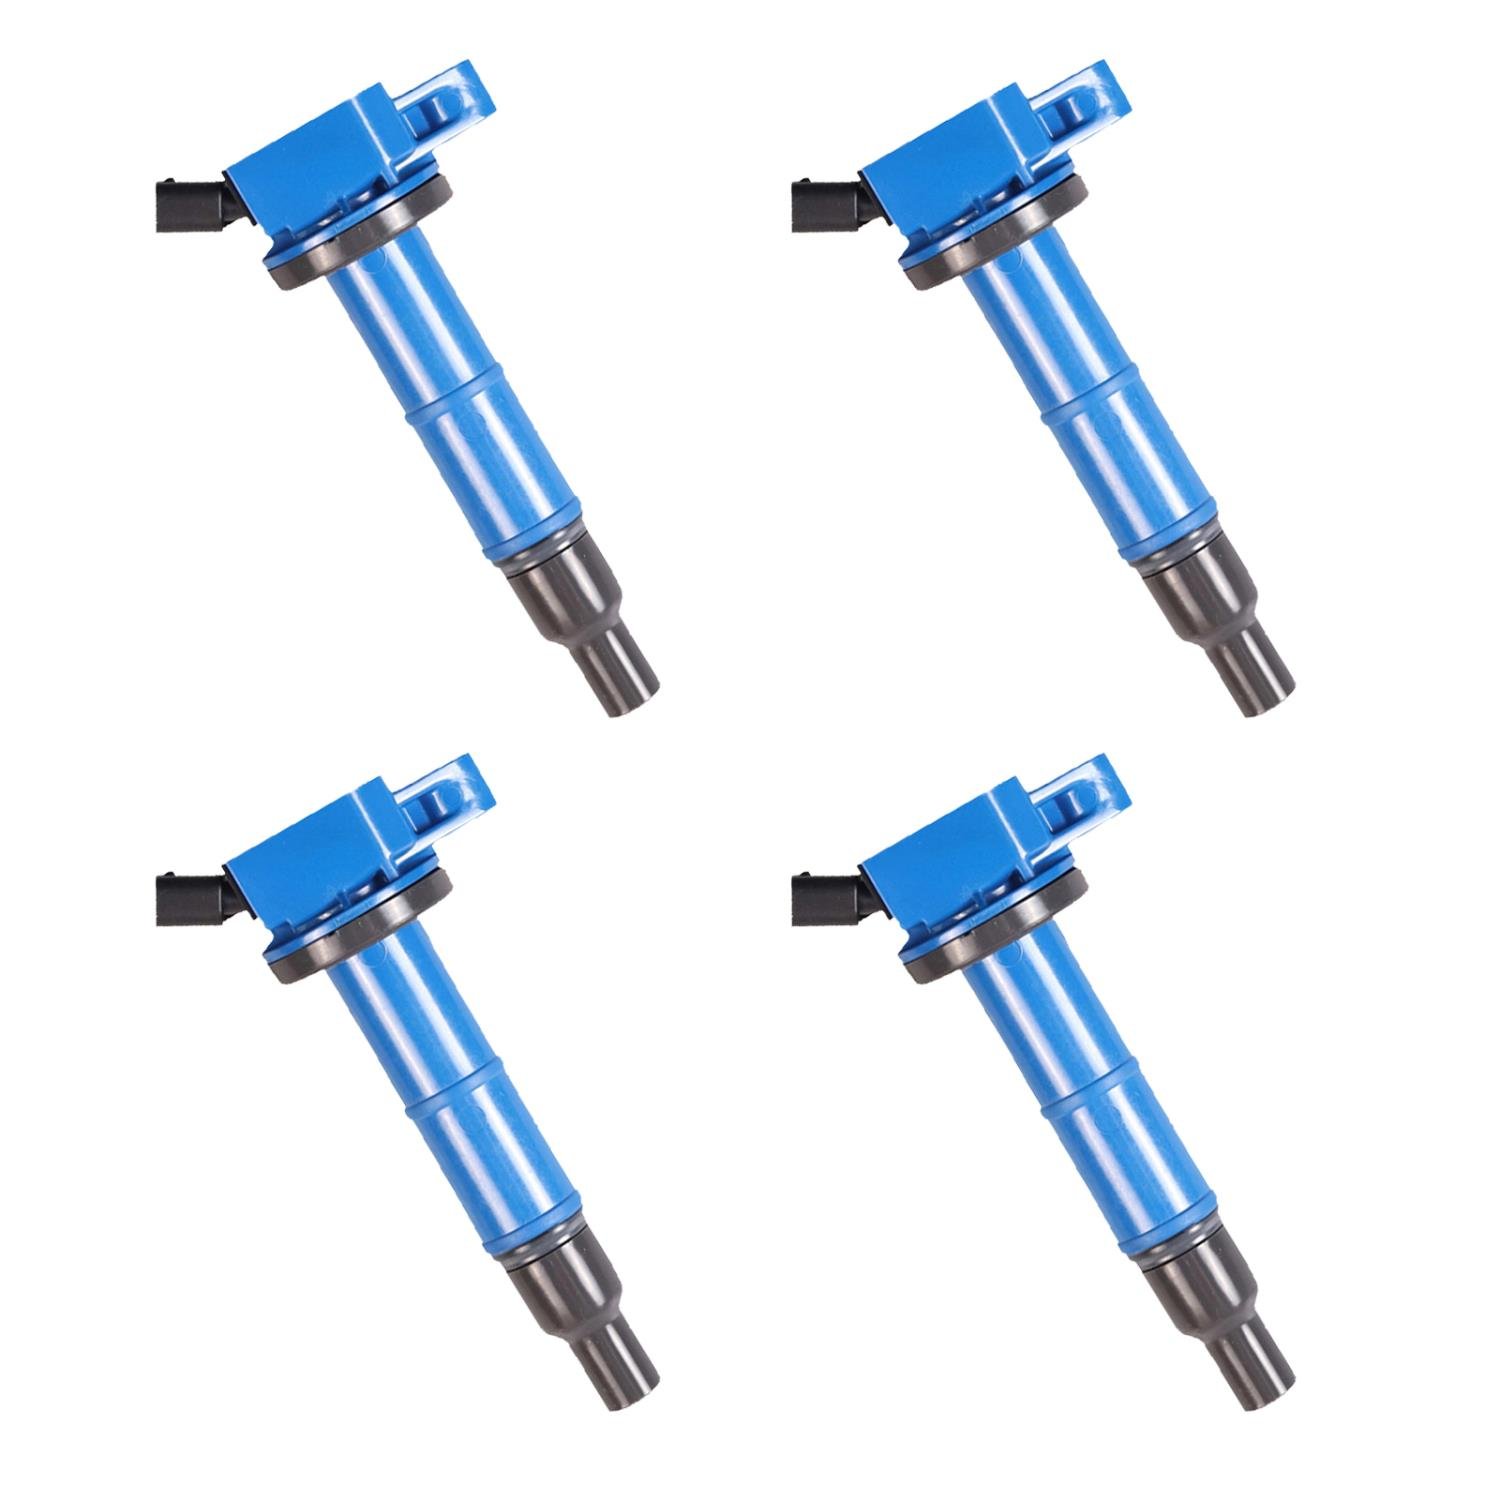 High-Performance Ignition Coils for Toyota Camry 2.4L [Blue]